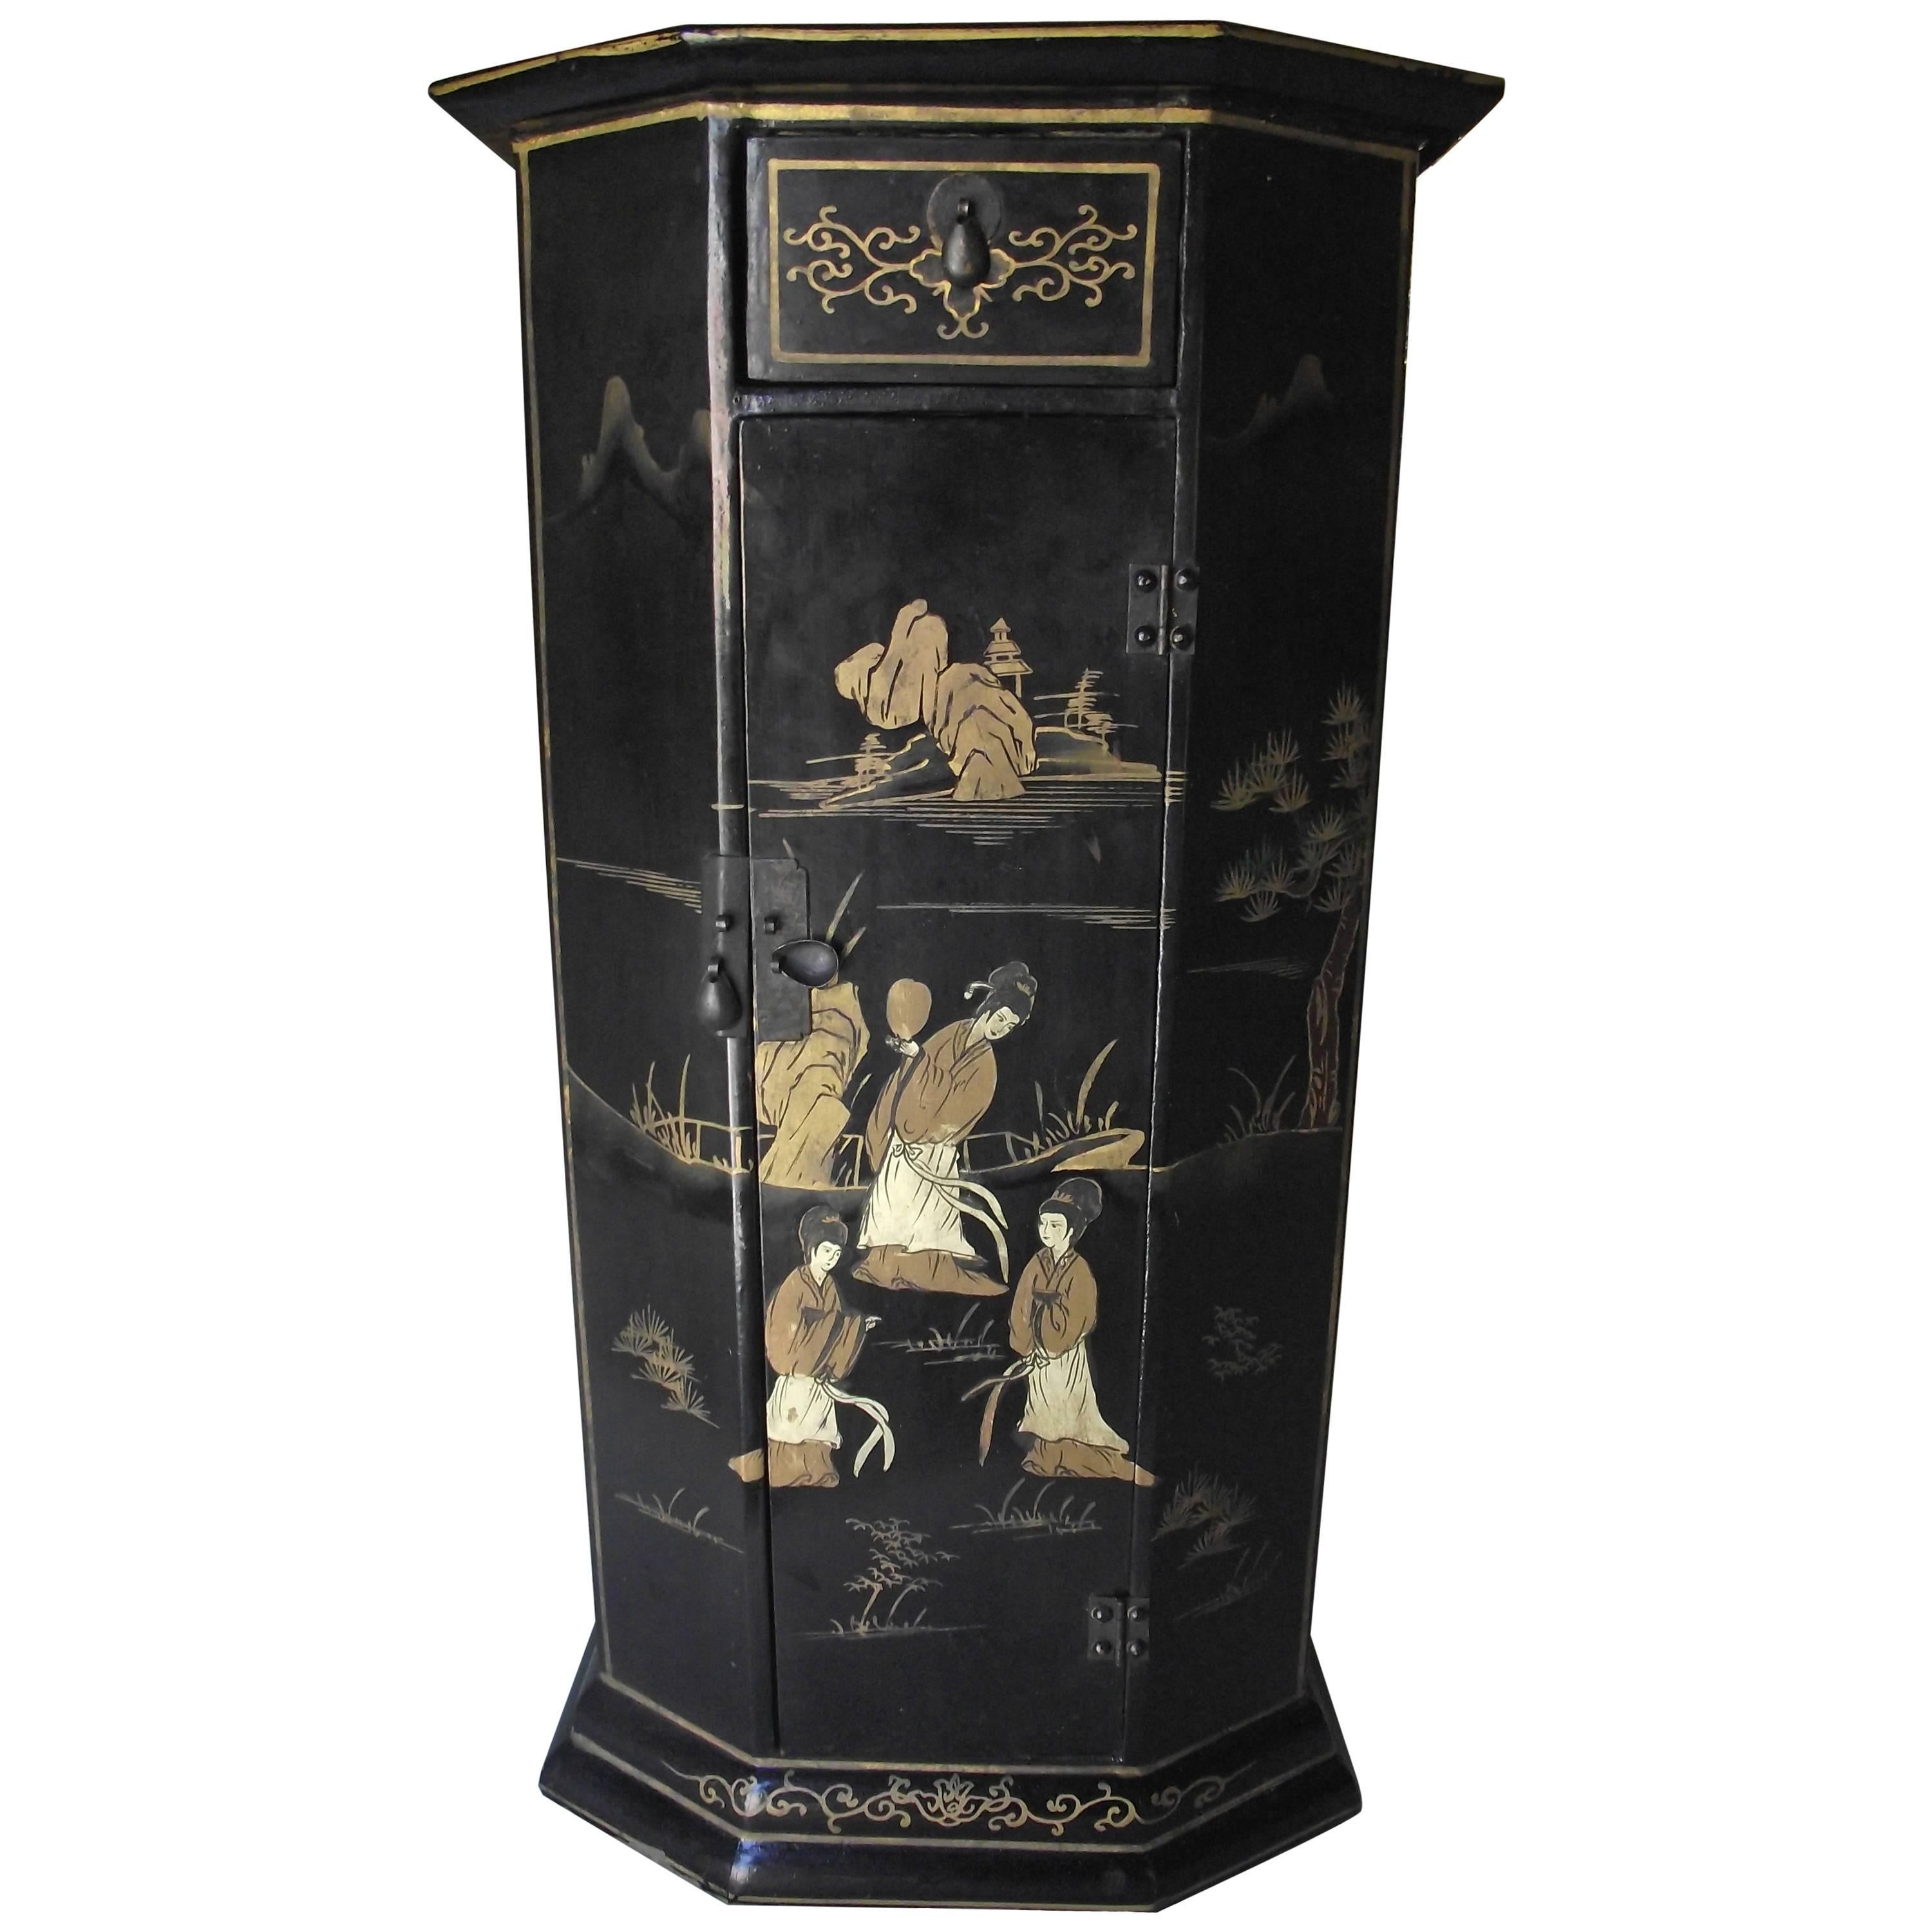 Coromandel Style Cabinet, Black Painted with Decals and Hand Painting, 1930s